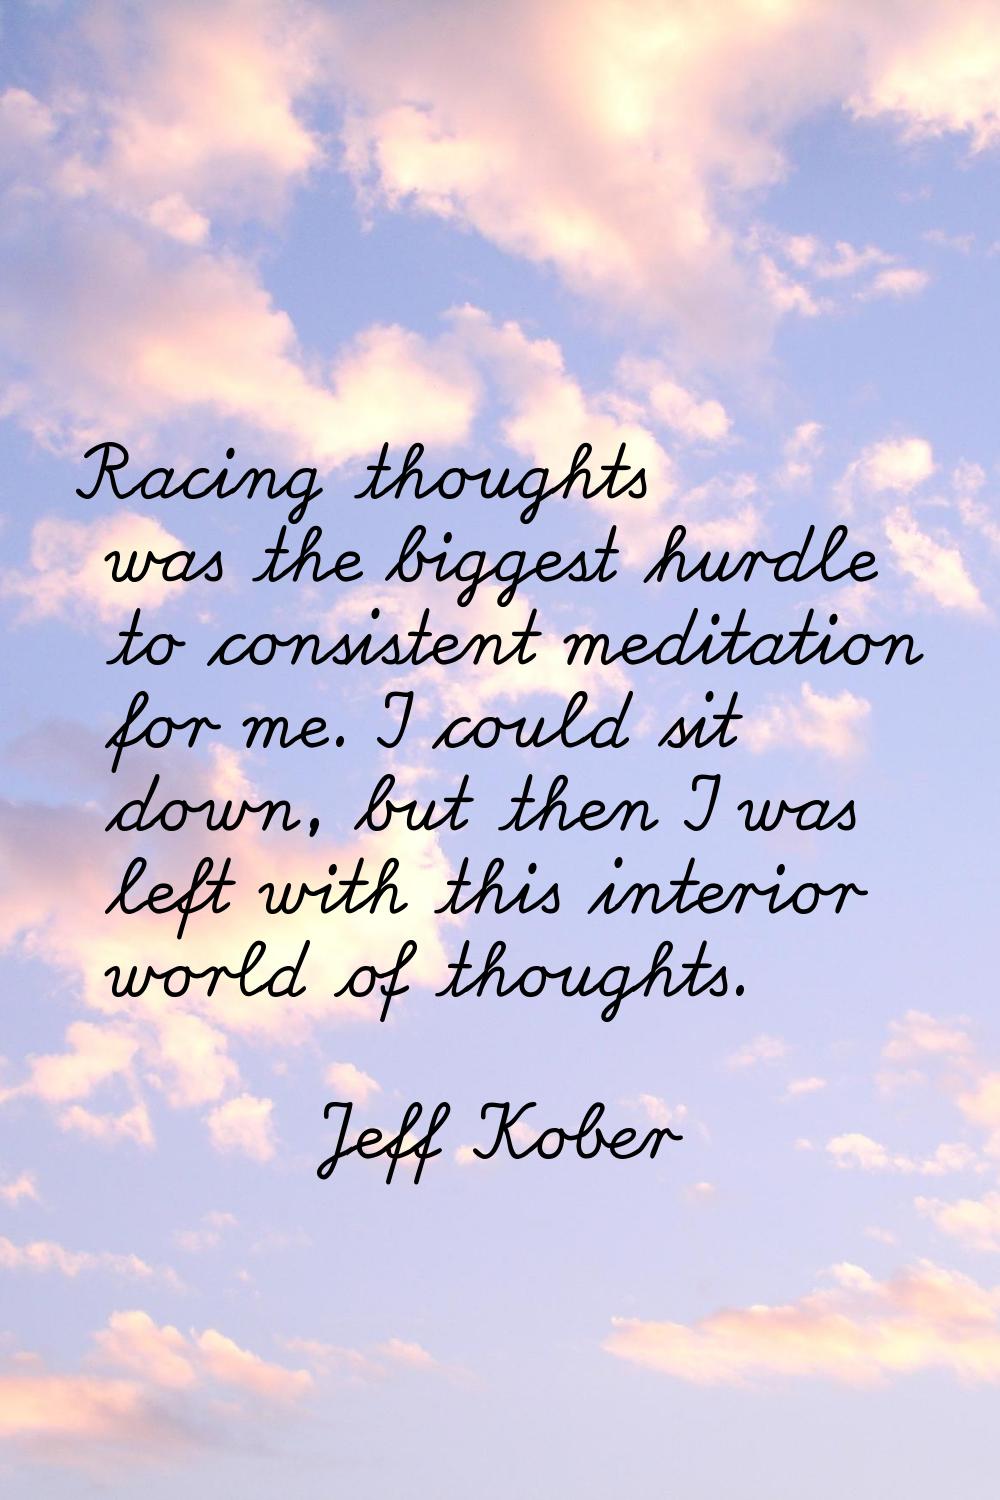 Racing thoughts was the biggest hurdle to consistent meditation for me. I could sit down, but then 